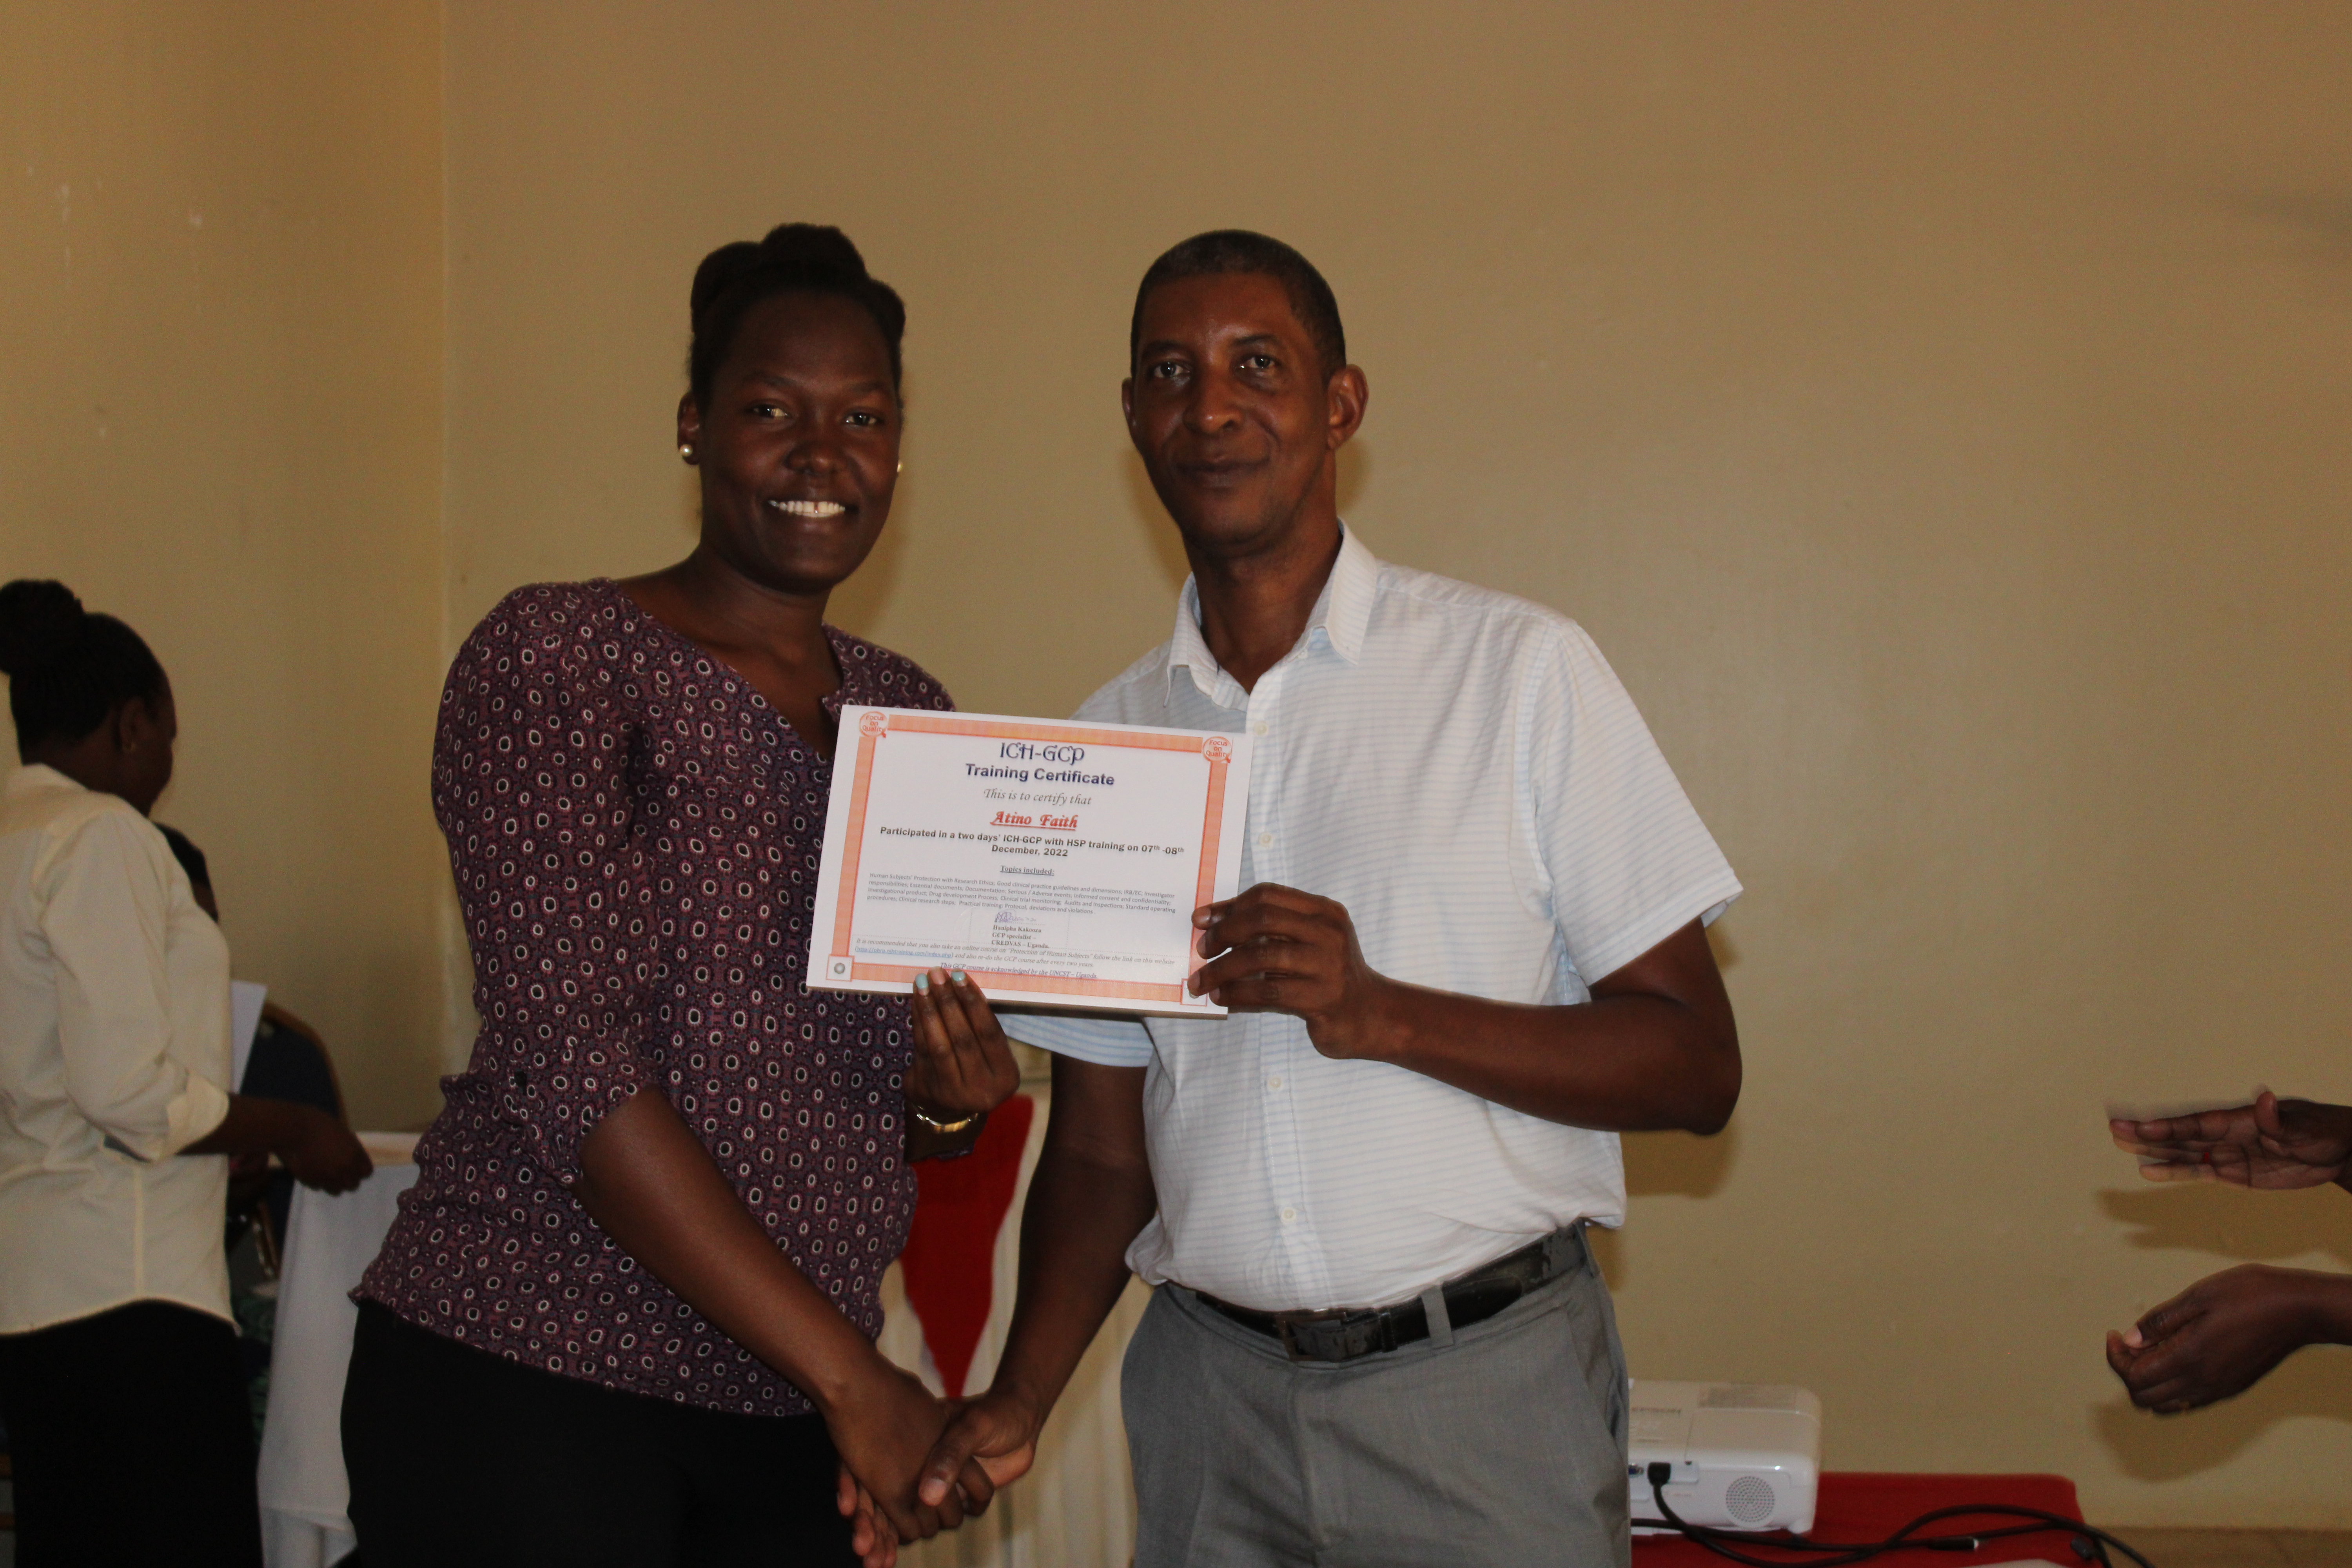 ED Proudly presents certificates to the trainees.